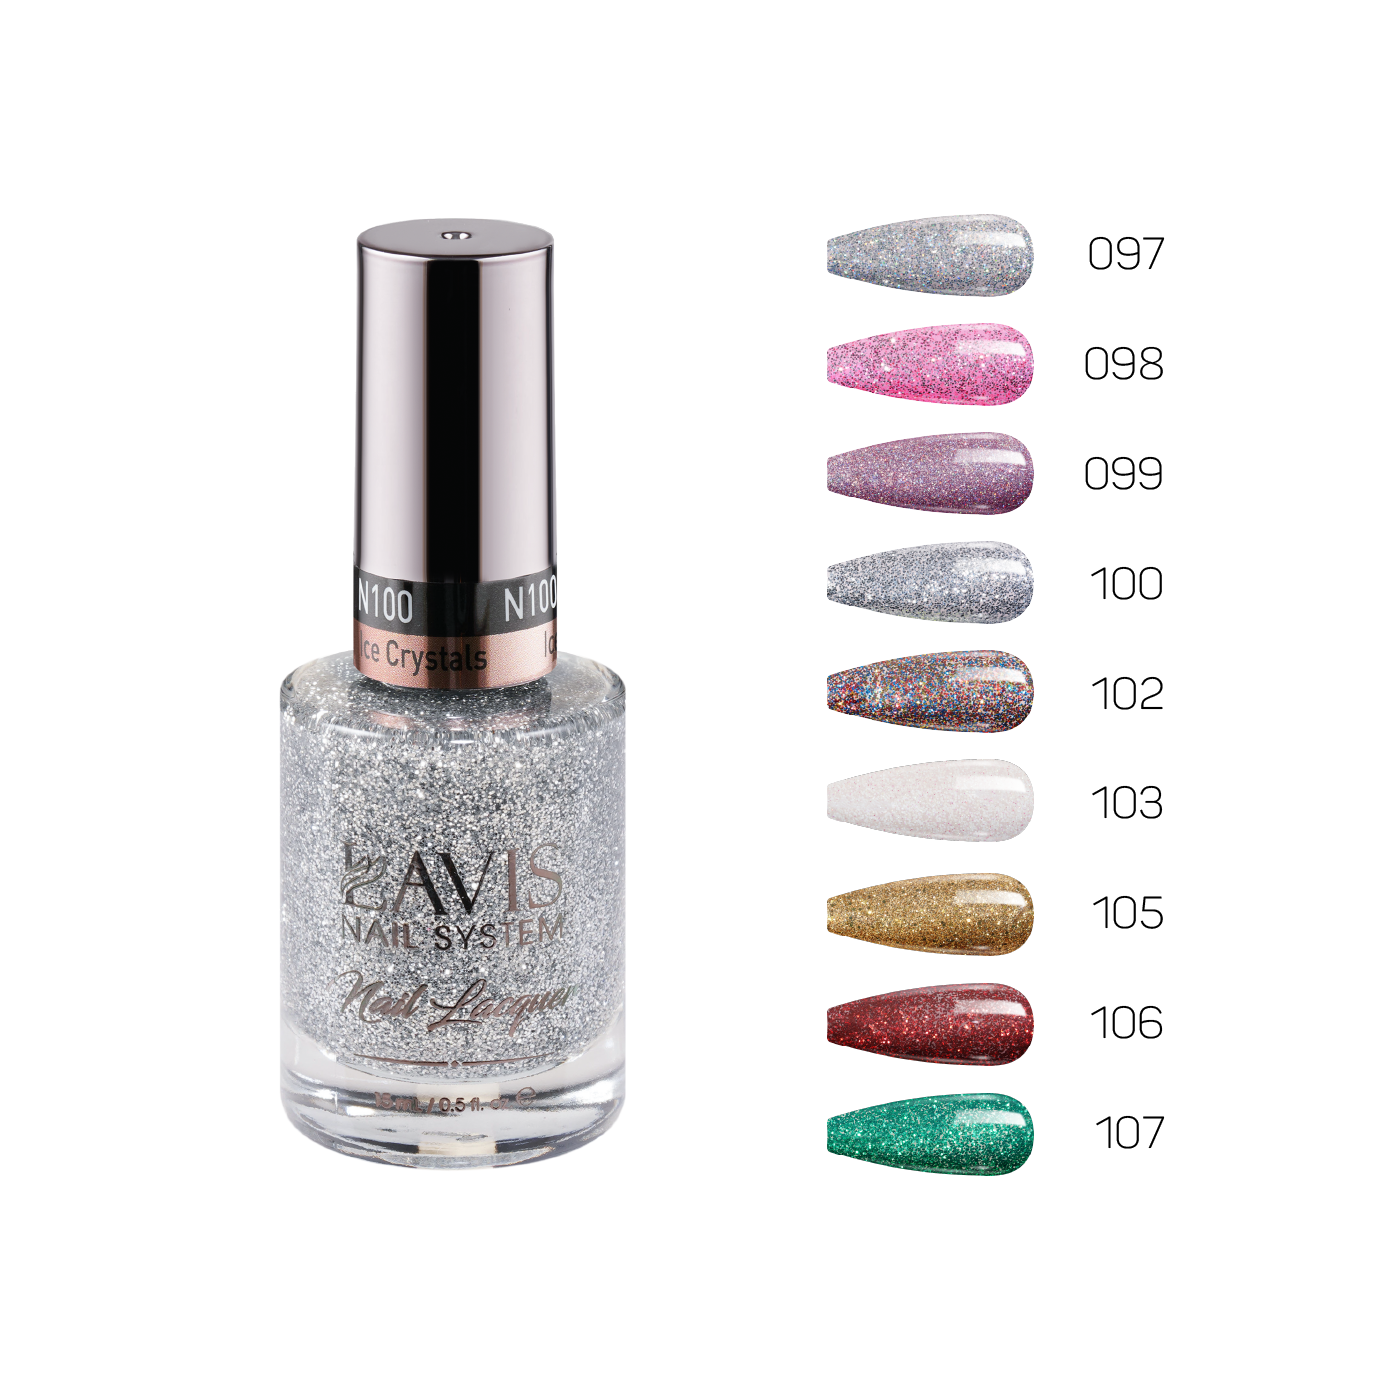 Lavis Healthy Nail Lacquer Fall Winter Set N6 (9 colors) : 097, 098, 099, 100, 102, 103, 105, 106, 107